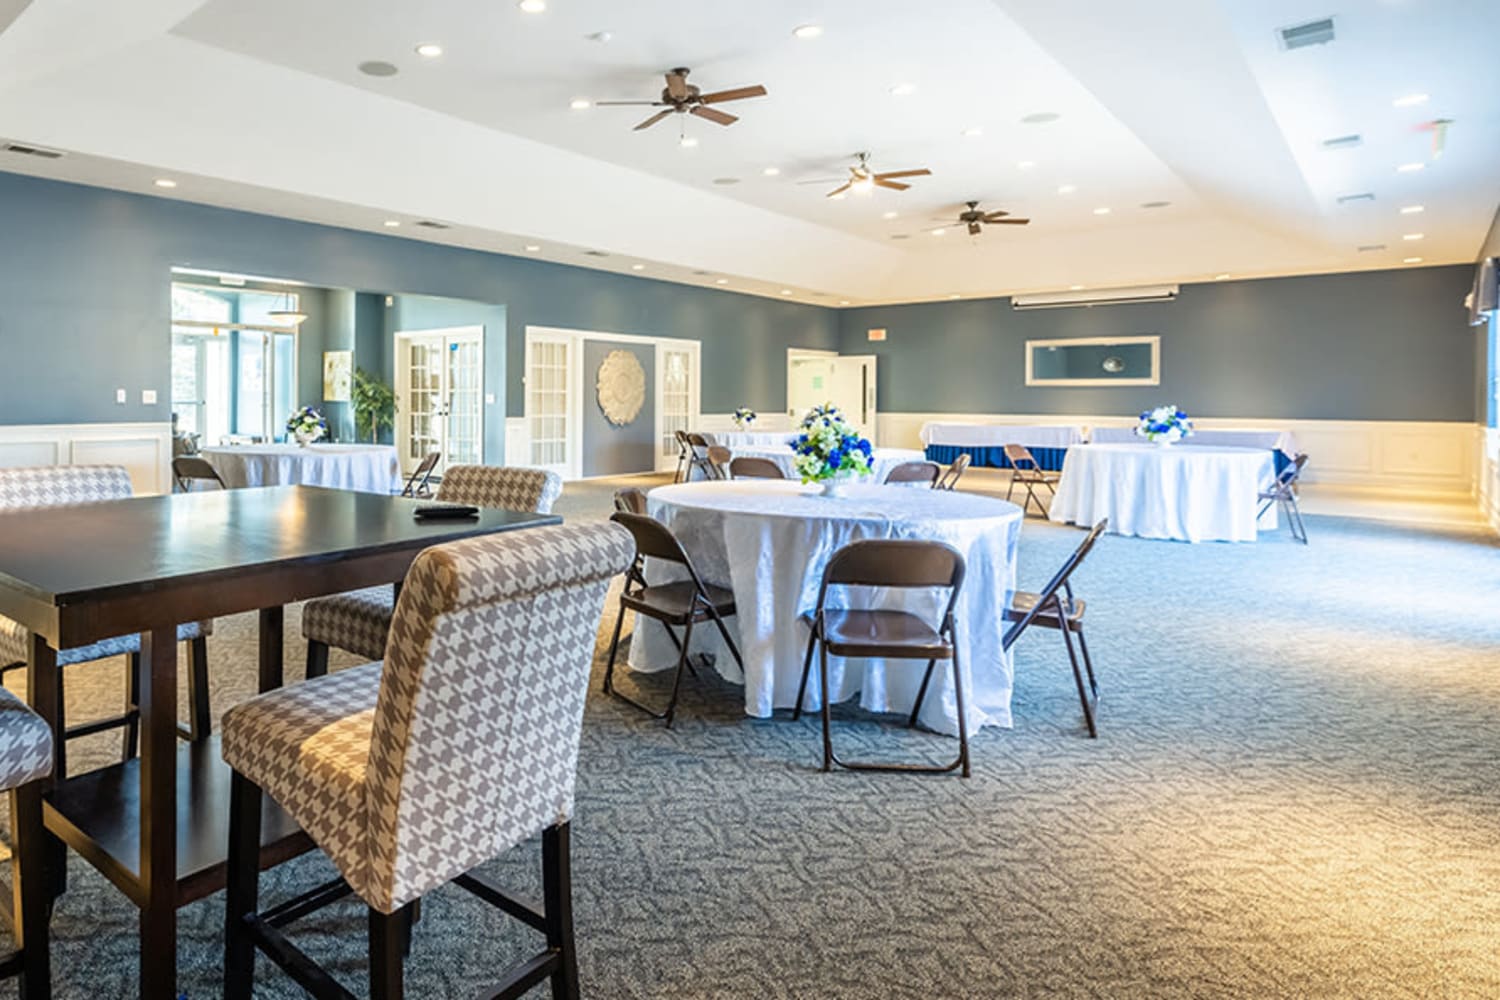 Avon Commons offers a spacious clubhouse in Avon, New York